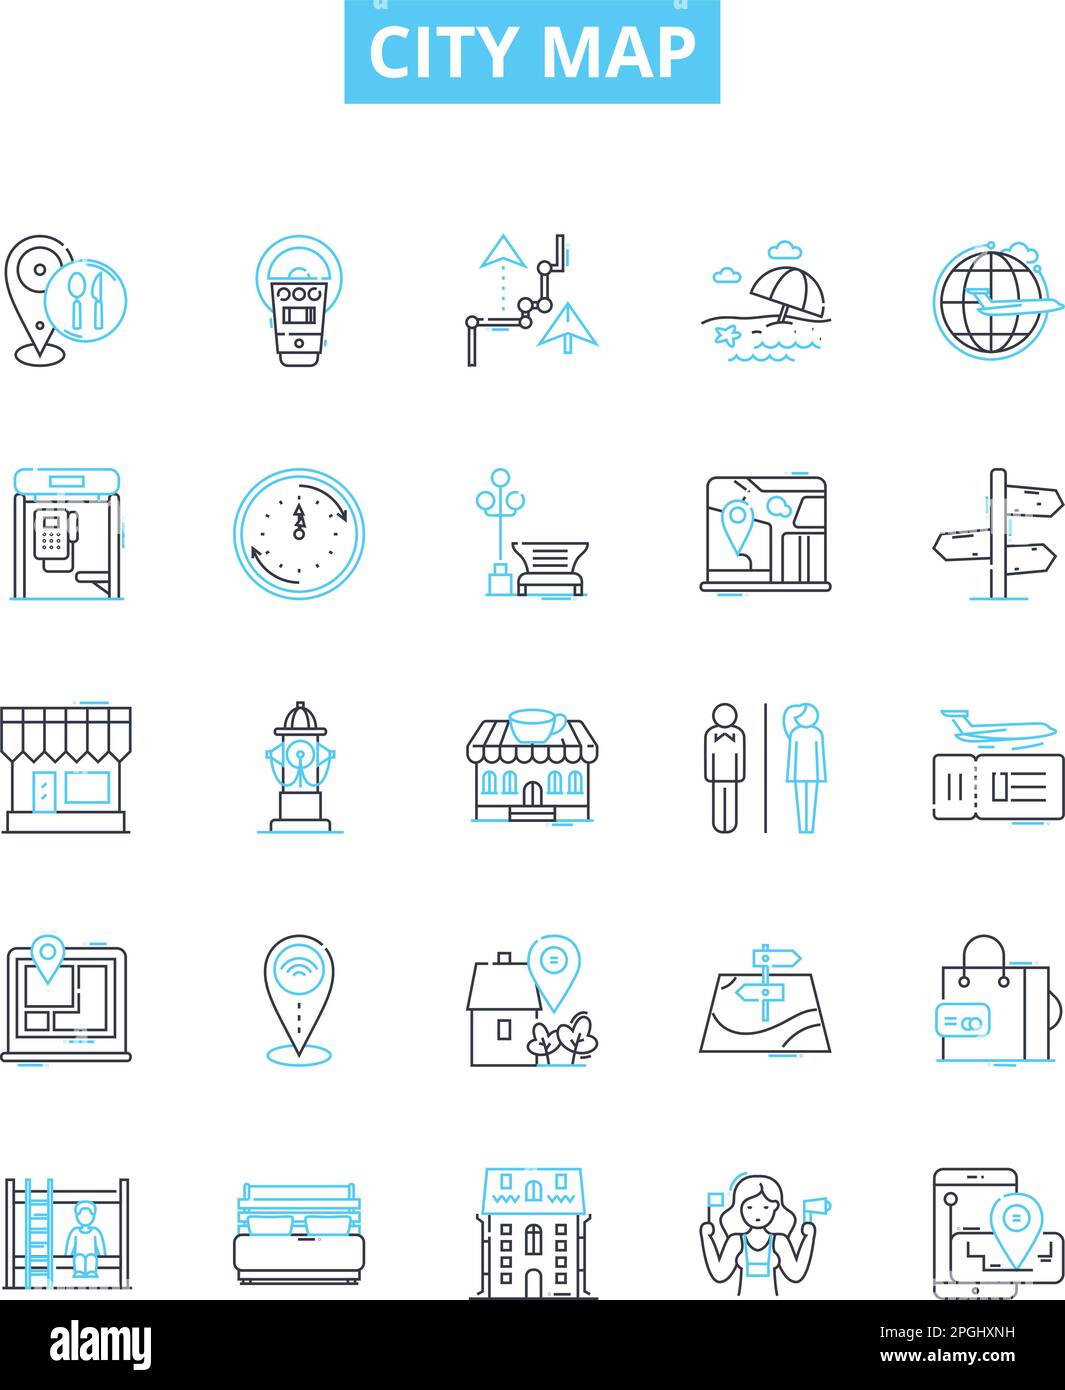 City map vector line icons set. City, Map, Urban, Layout, Cartography, Streets, Directions illustration outline concept symbols and signs Stock Vector